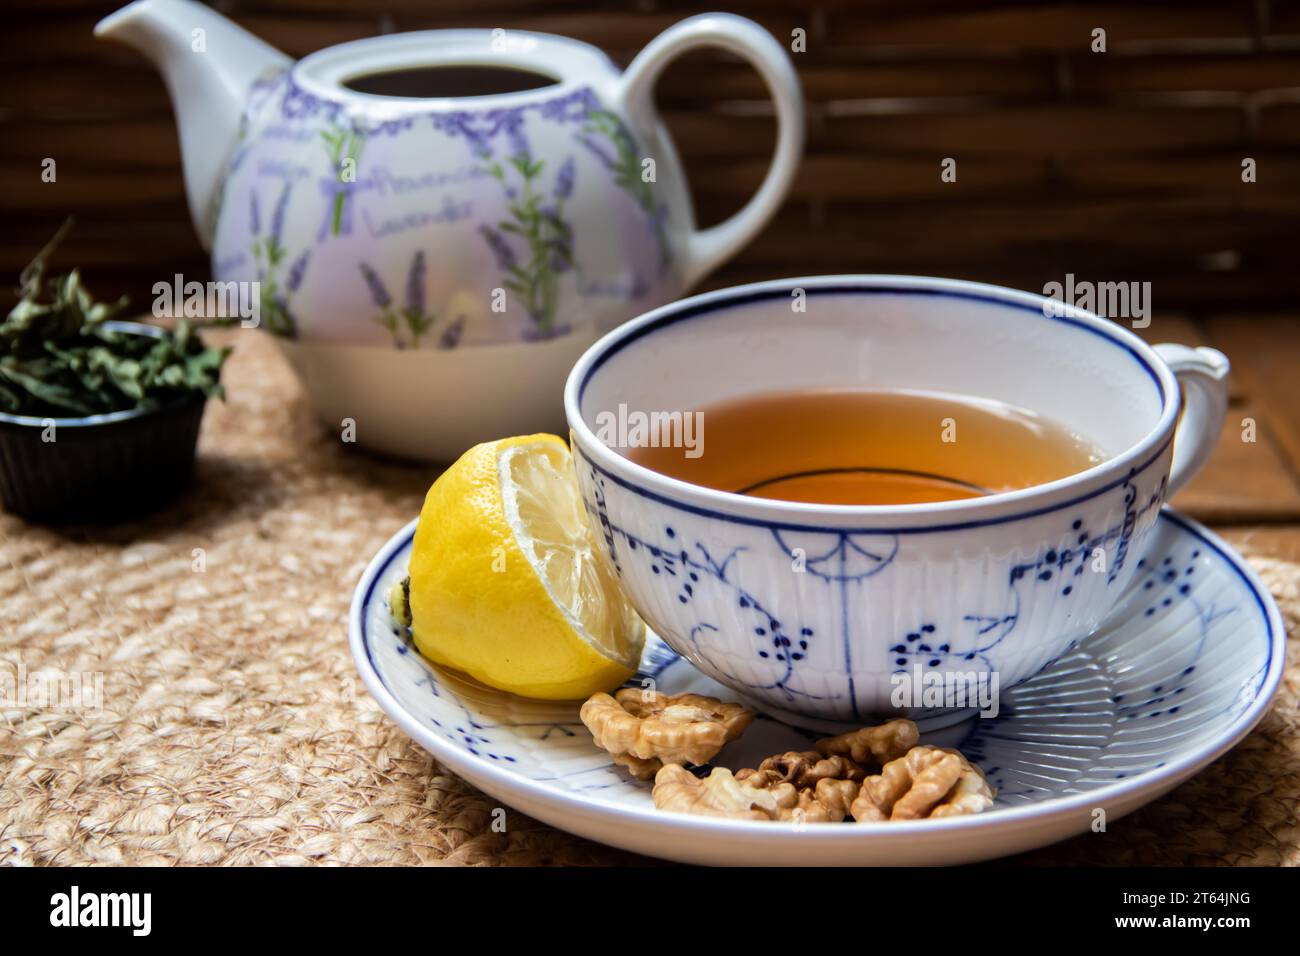 Morning setup on wooden table at balcony, newspapers, cup of natural tea, teapot, organic honey from farm, fresh green tea leaves and organic fruits Stock Photo